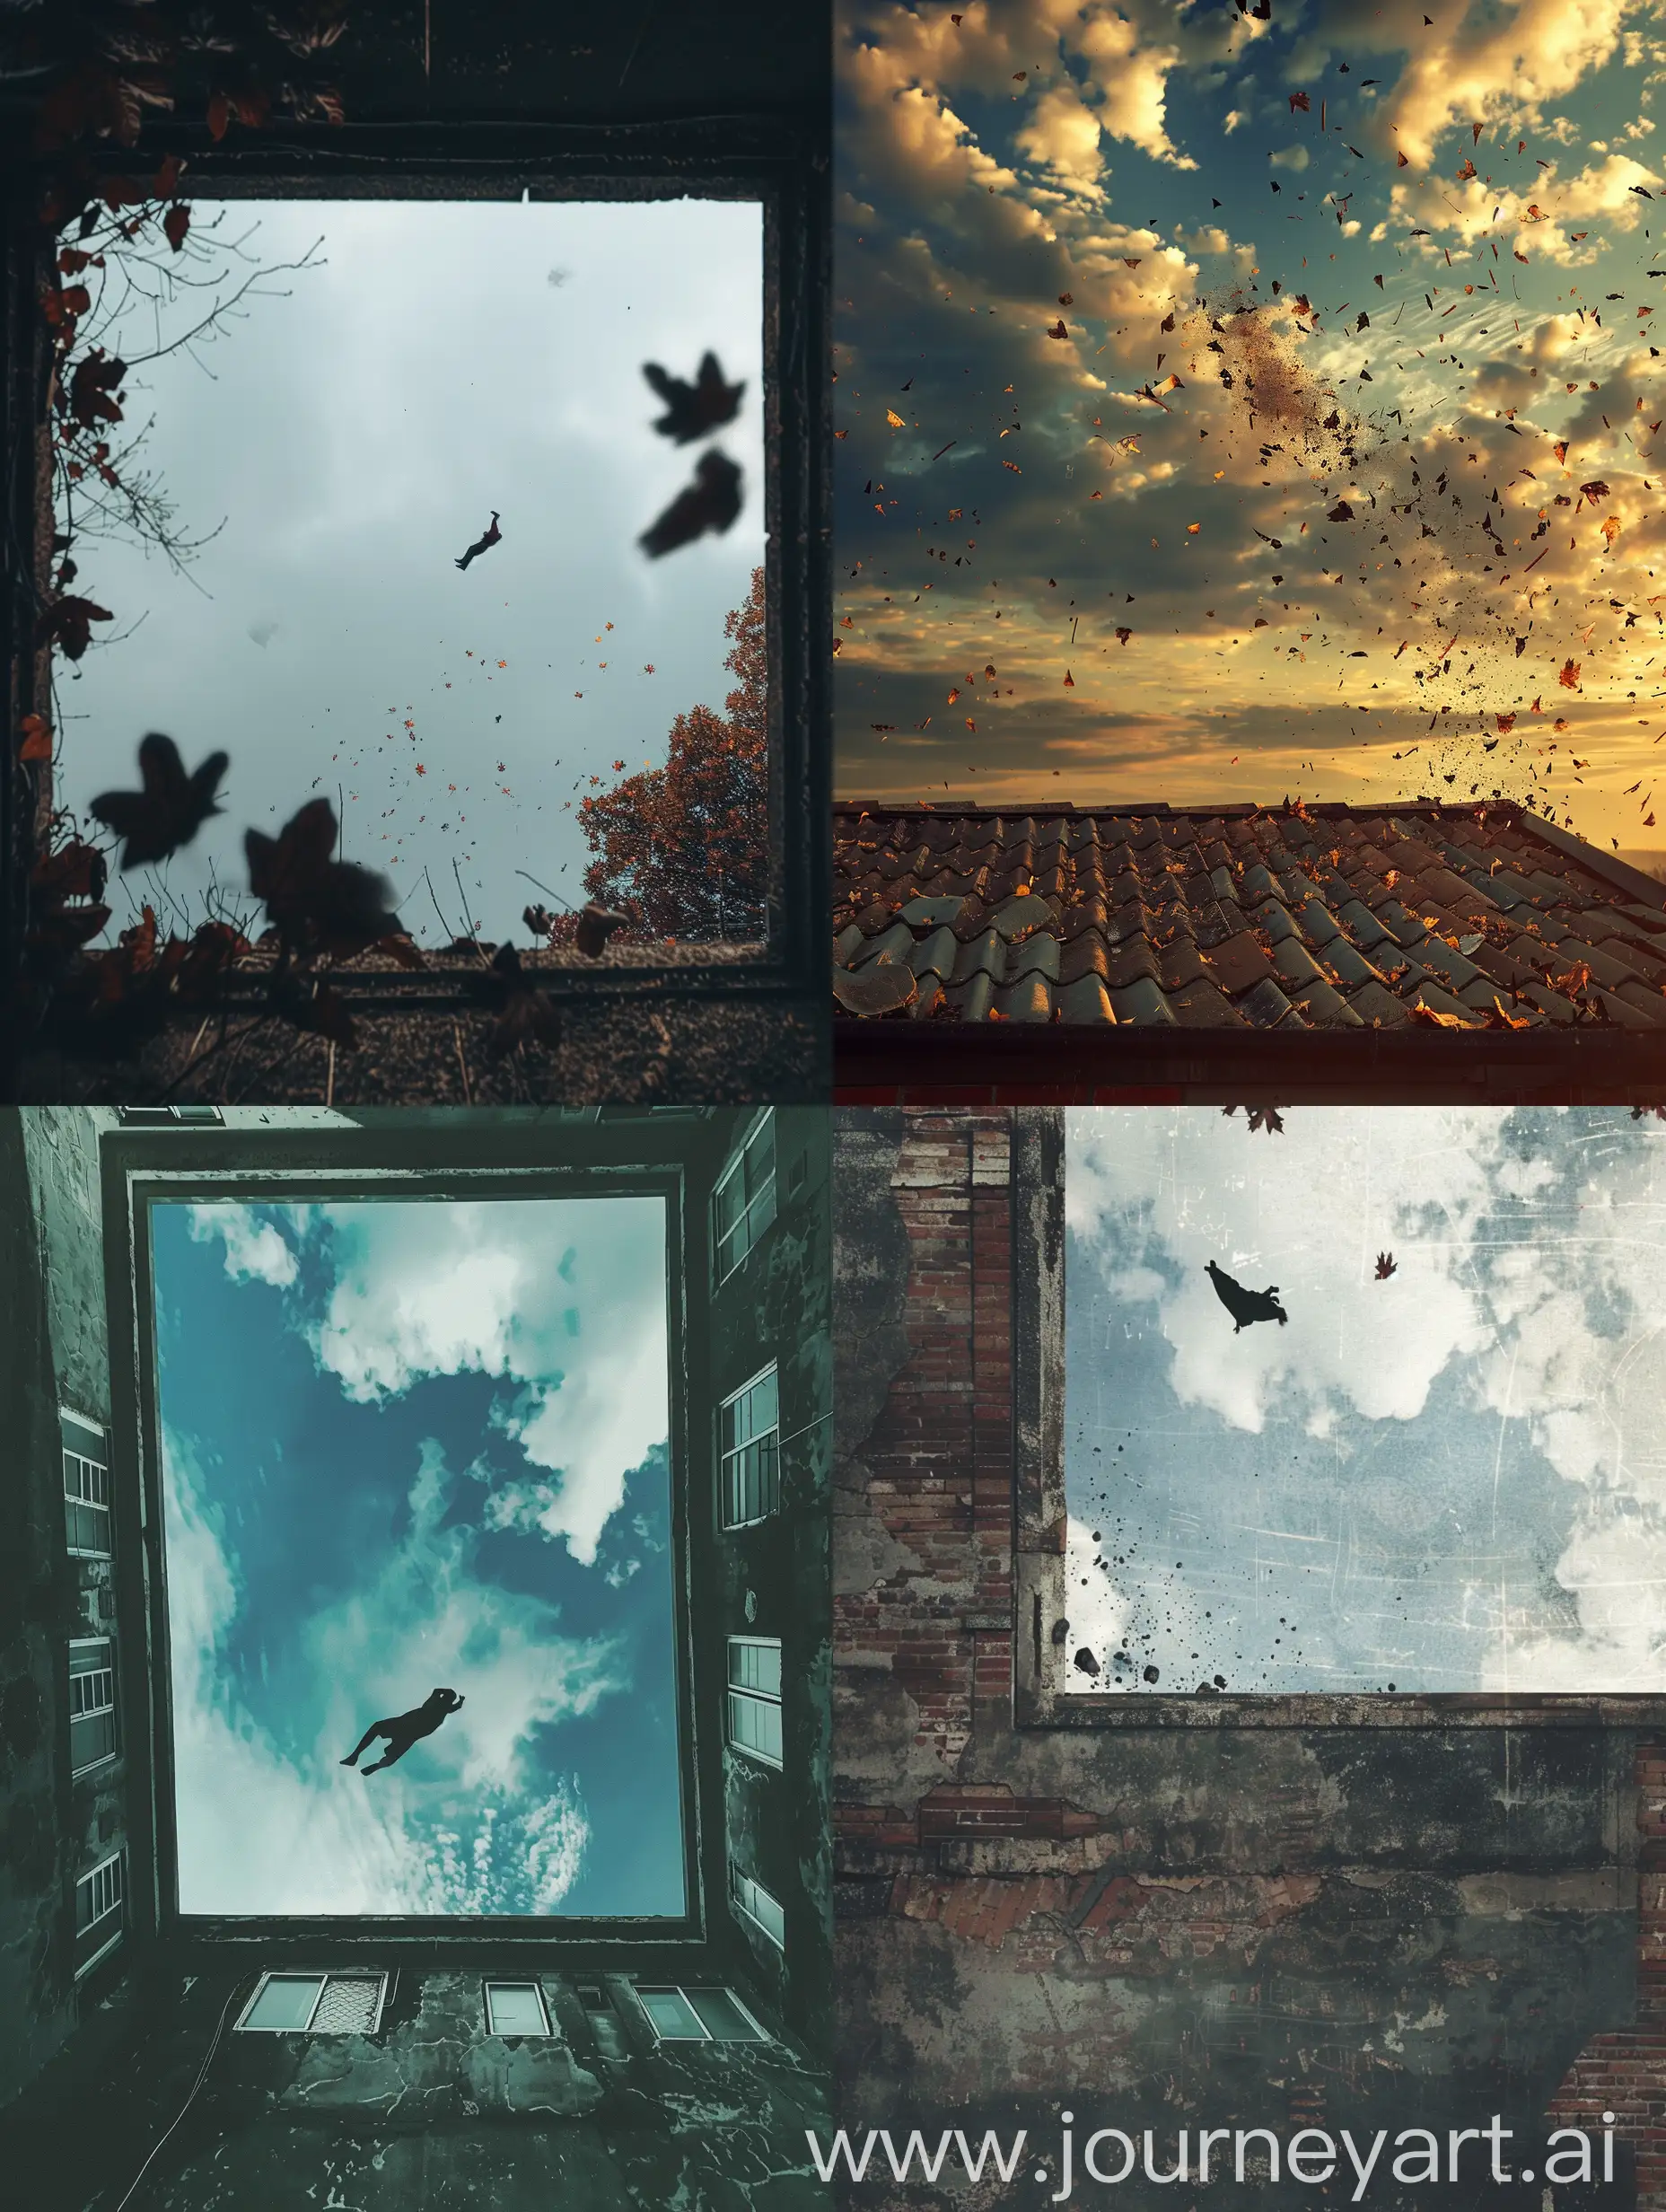 Aesthetics of a photo of a fall from a roof with a view of the sky